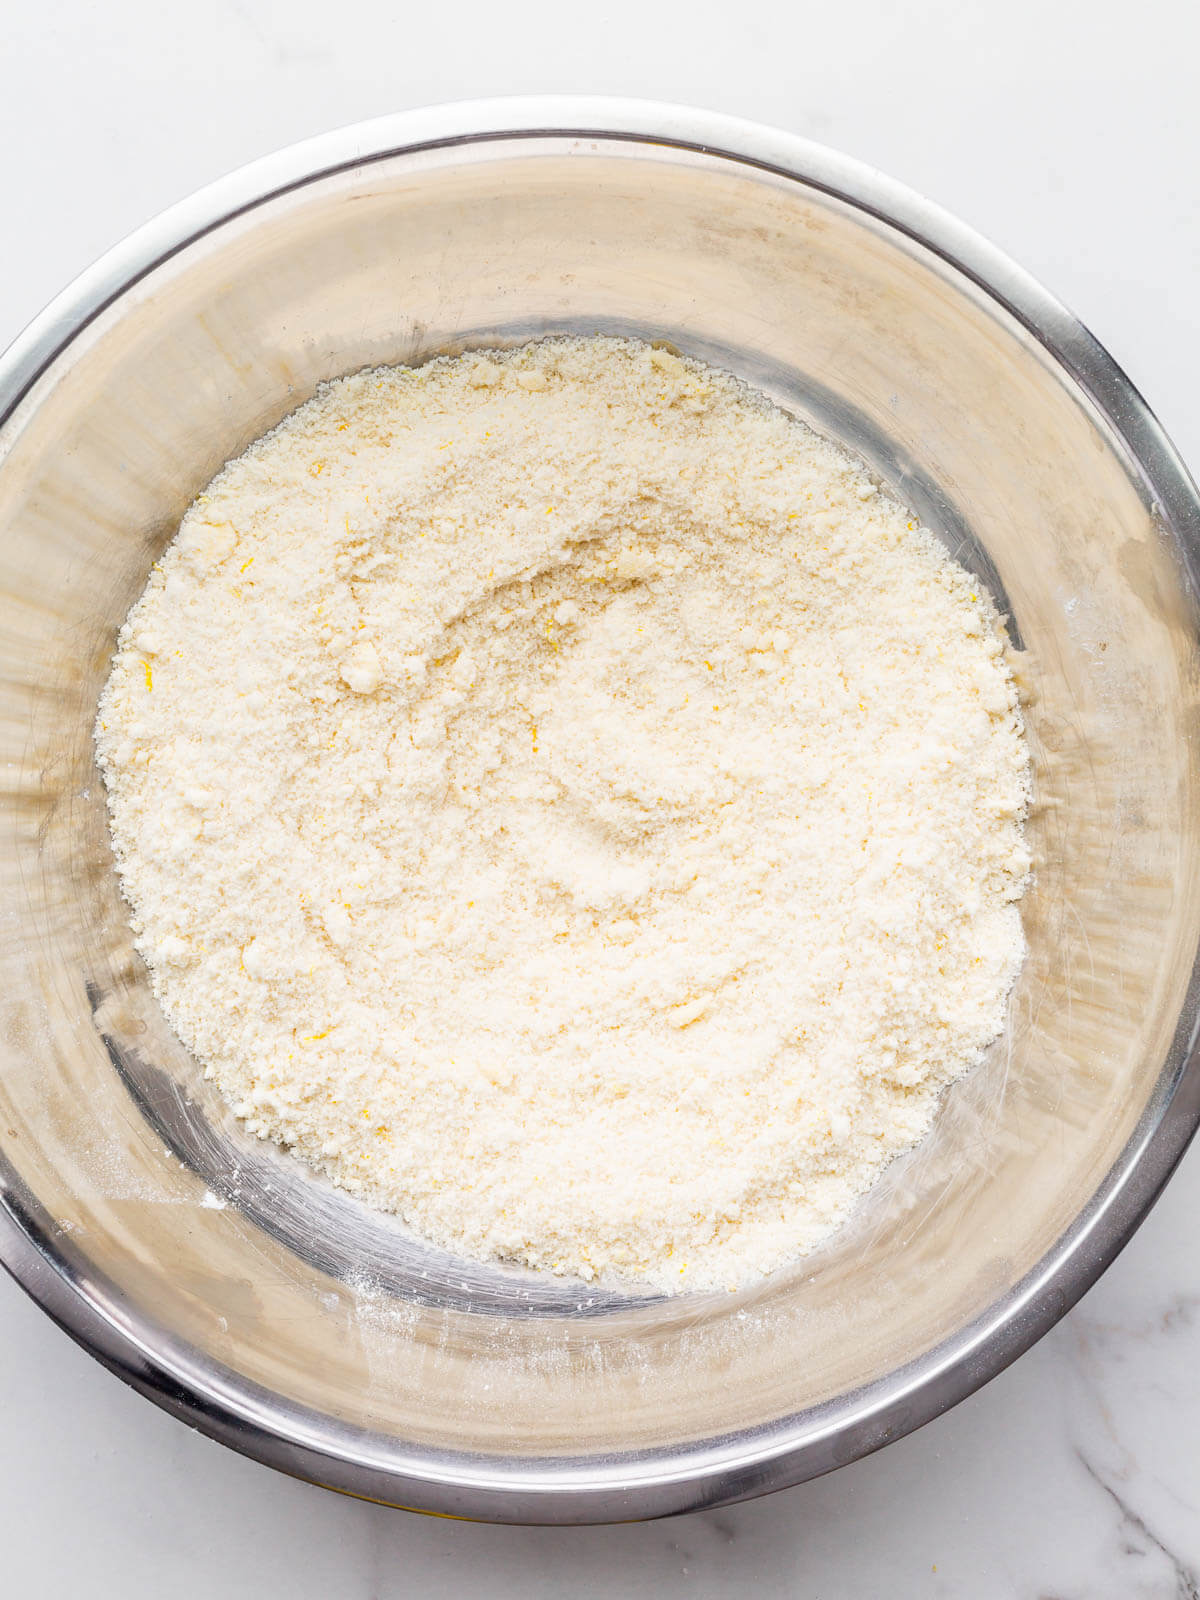 A coarse mixture of flour, sugar, leavening agents, and butter for the reverse creaming method.